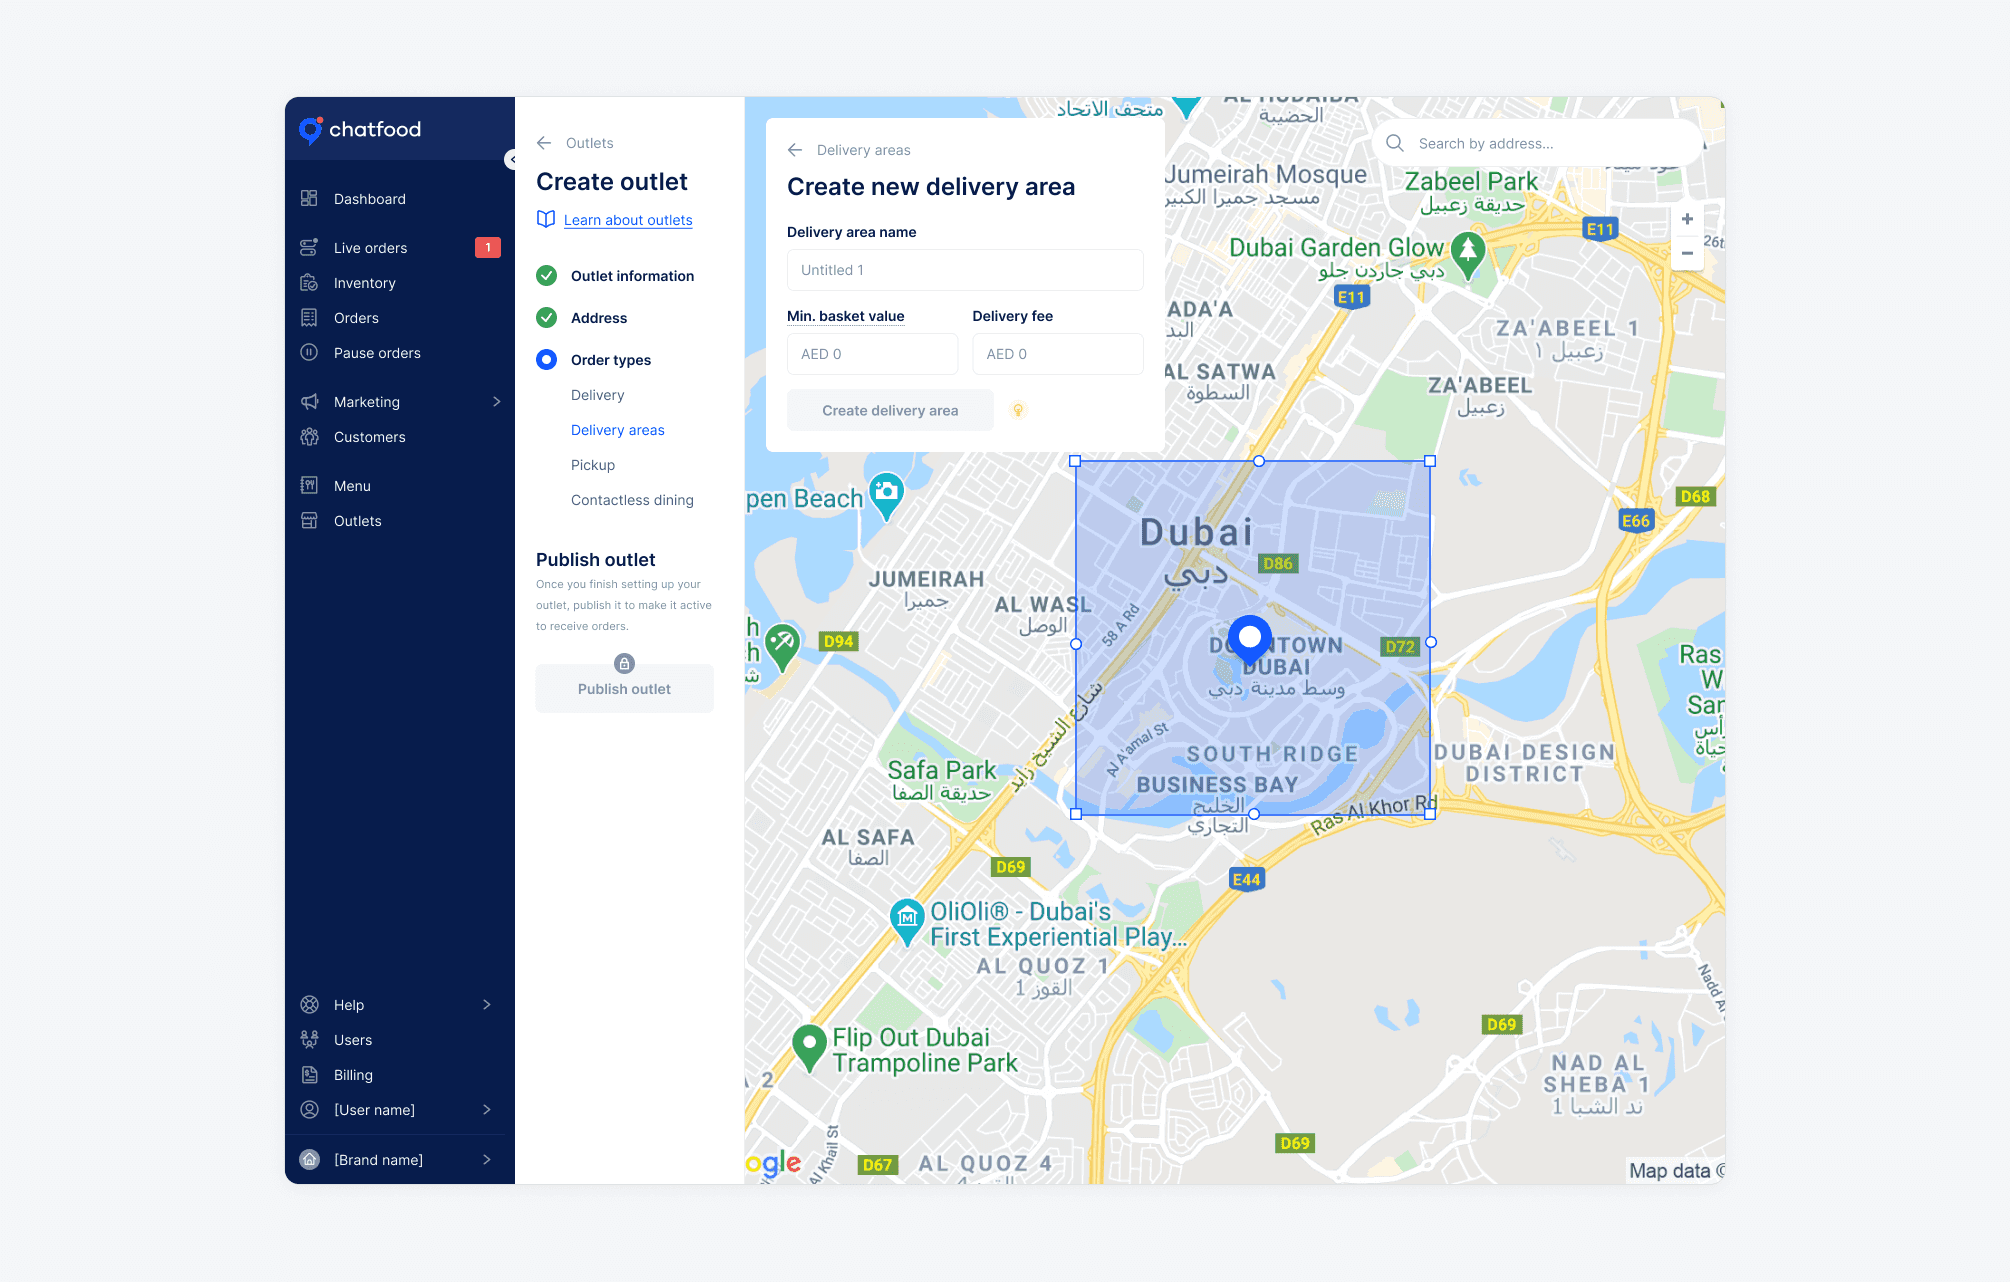 Delivery areas